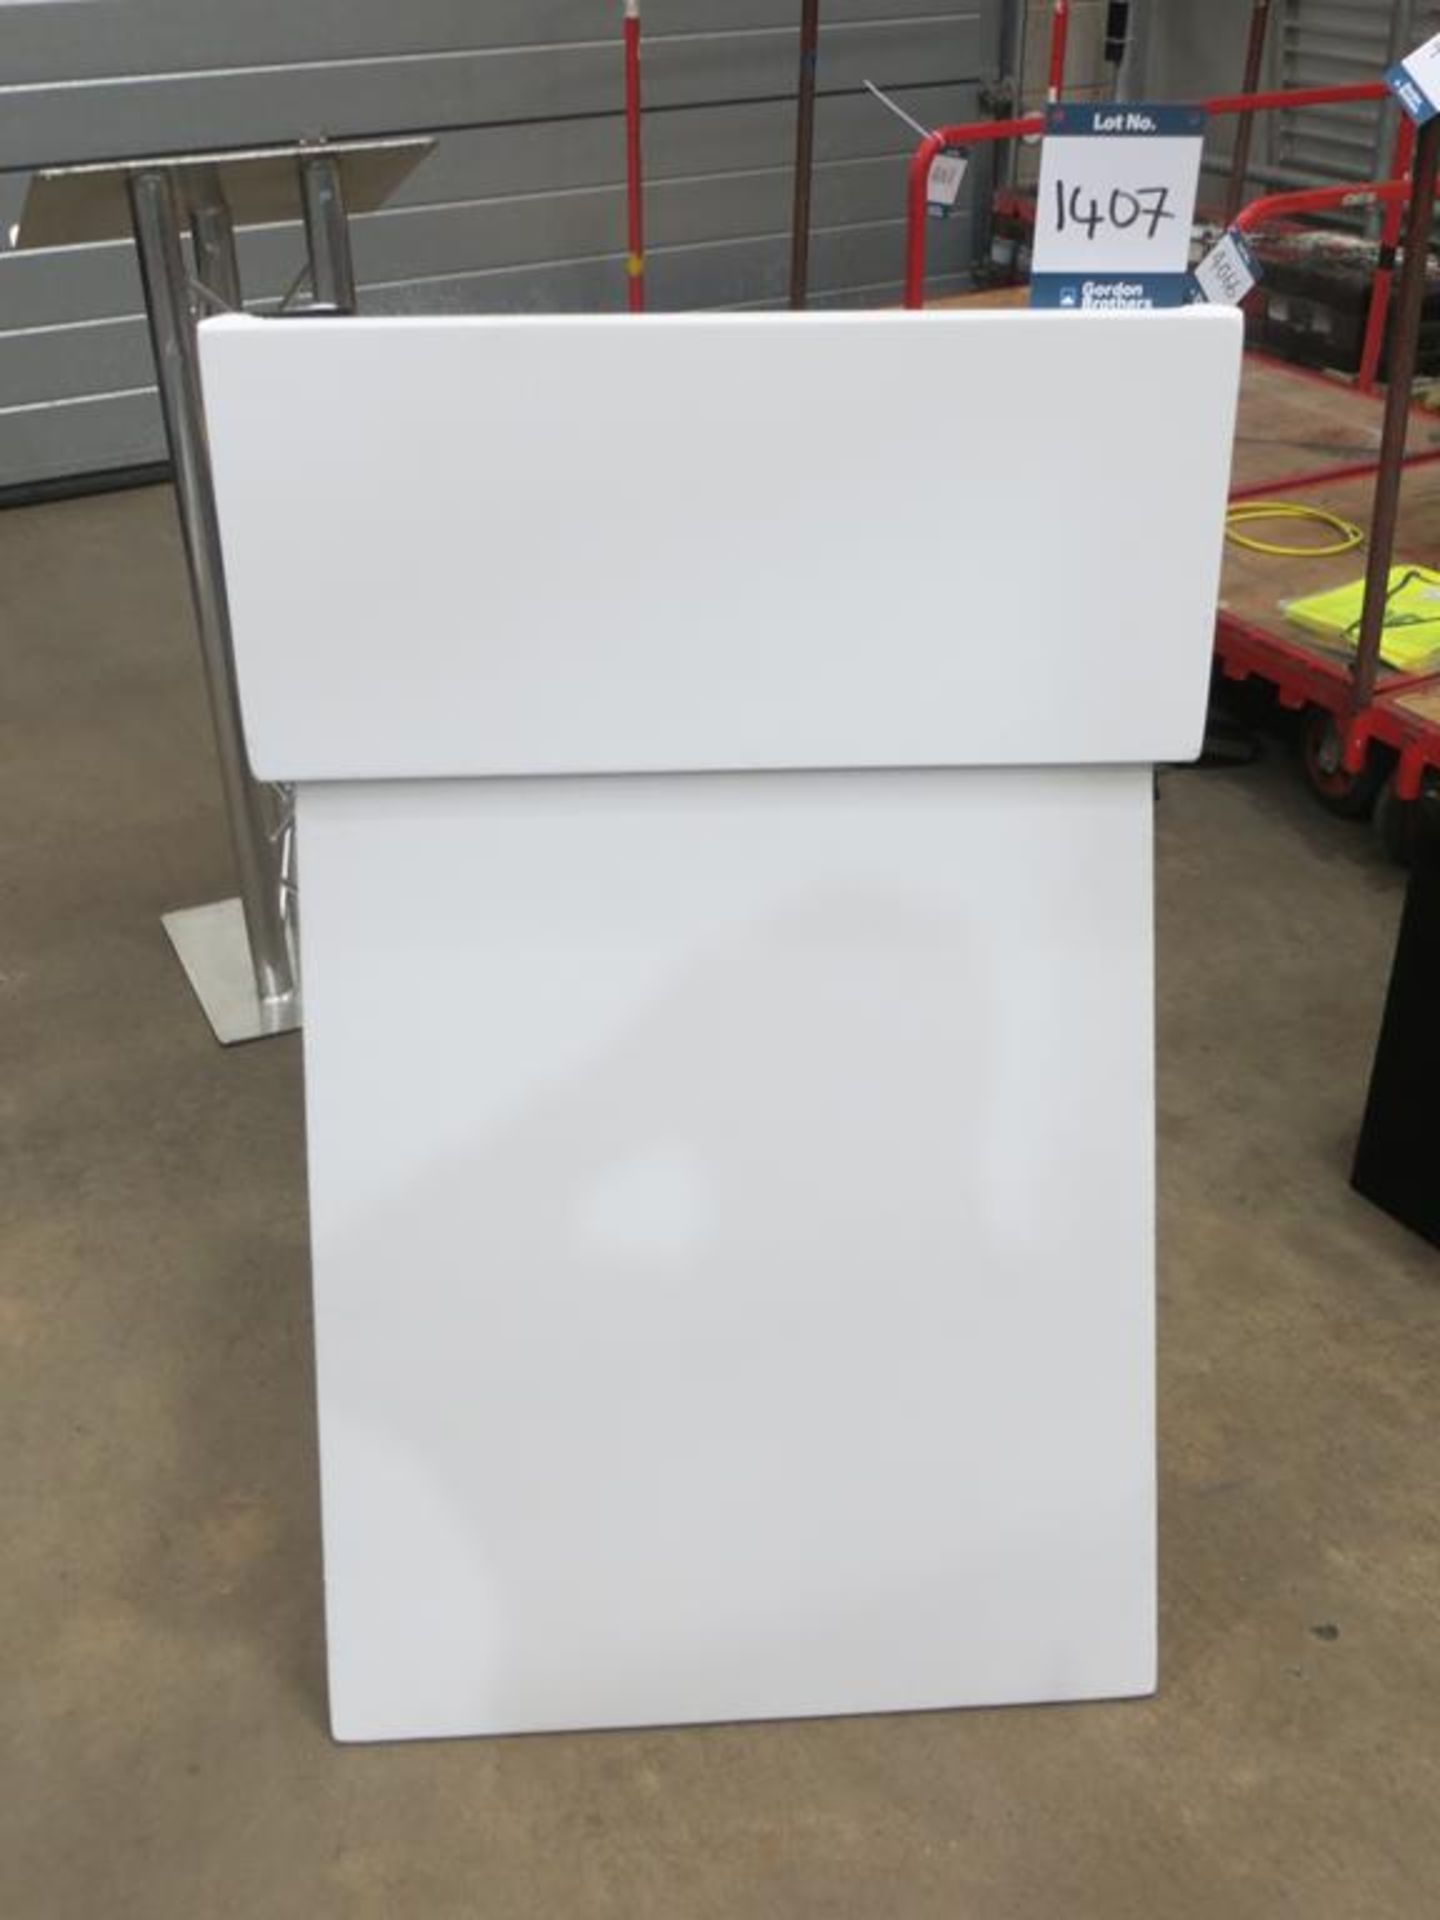 White two part conference lectern in 2x No. soft carry bags: Unit 500, Eckersall Road, Birmingham